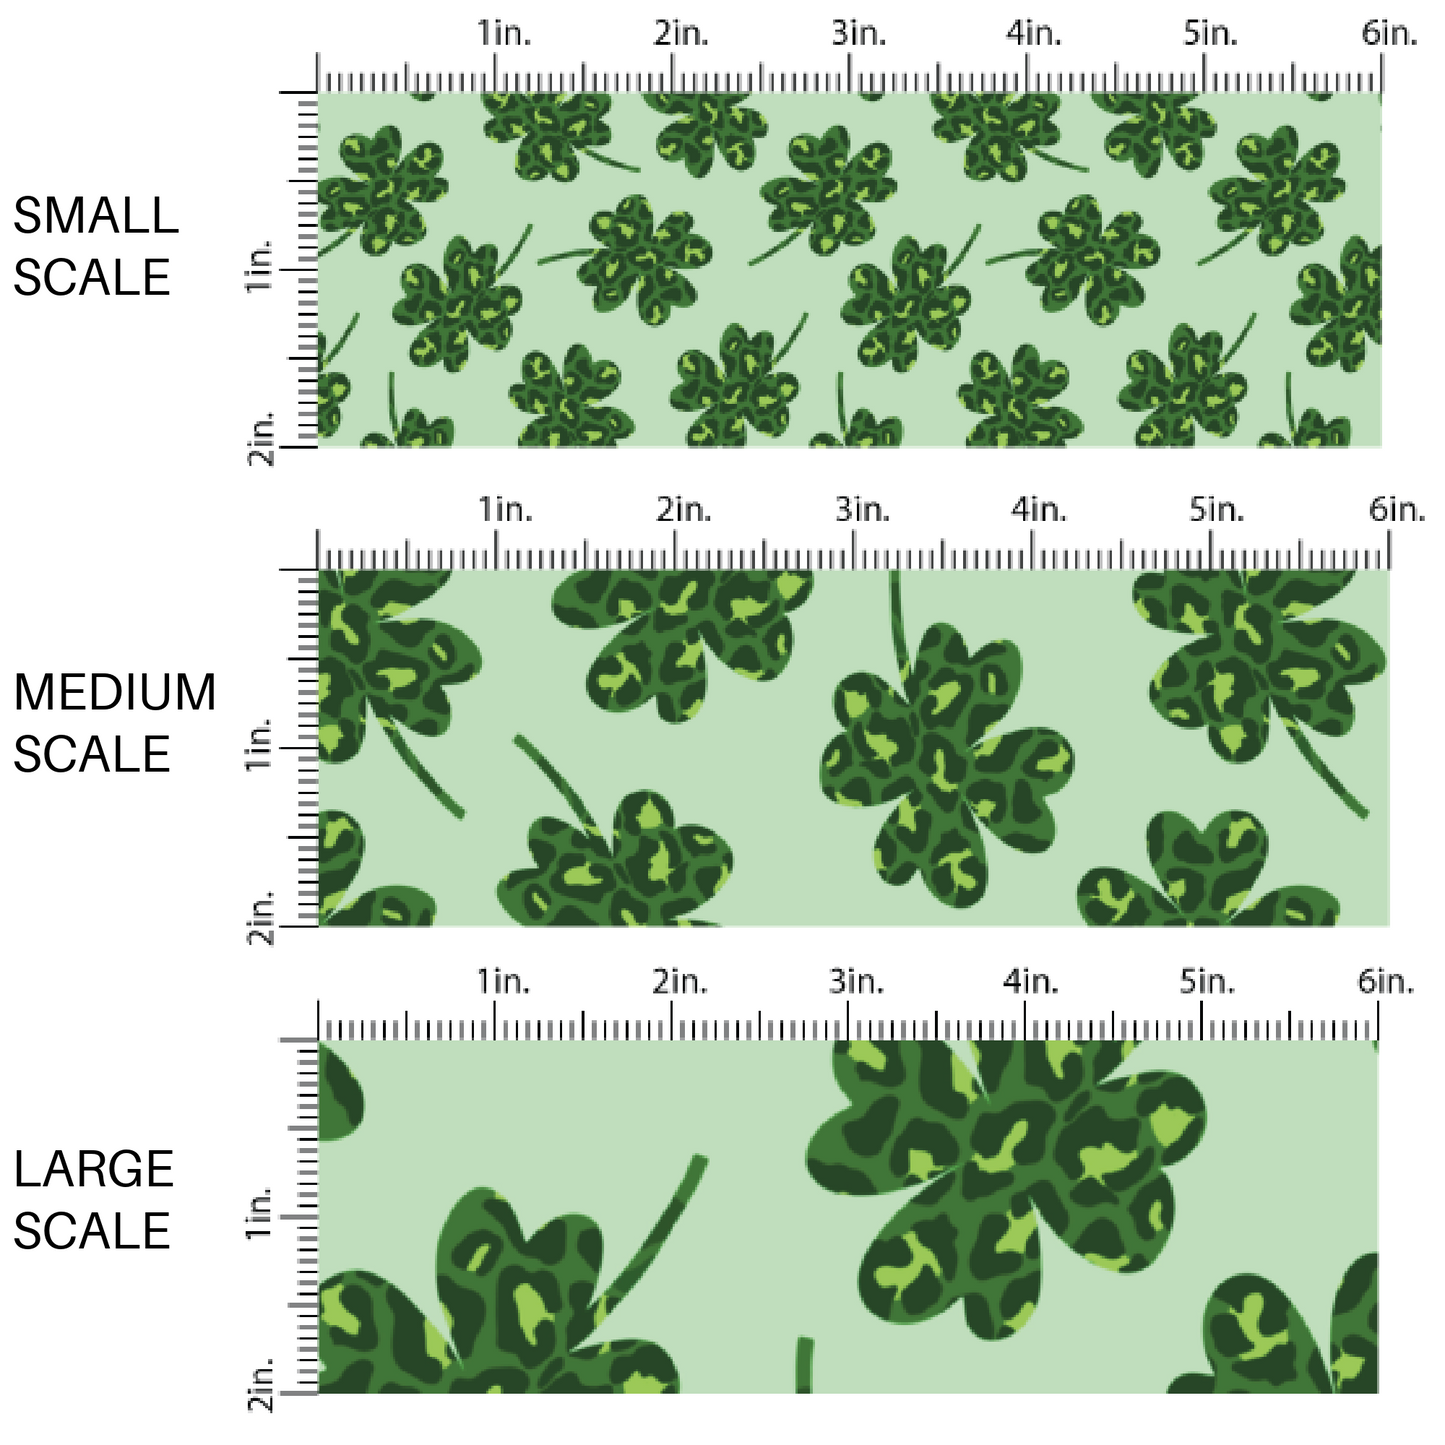 Scaled fabric by the yard image guide with light green fabric and dark green shamrocks leopard print